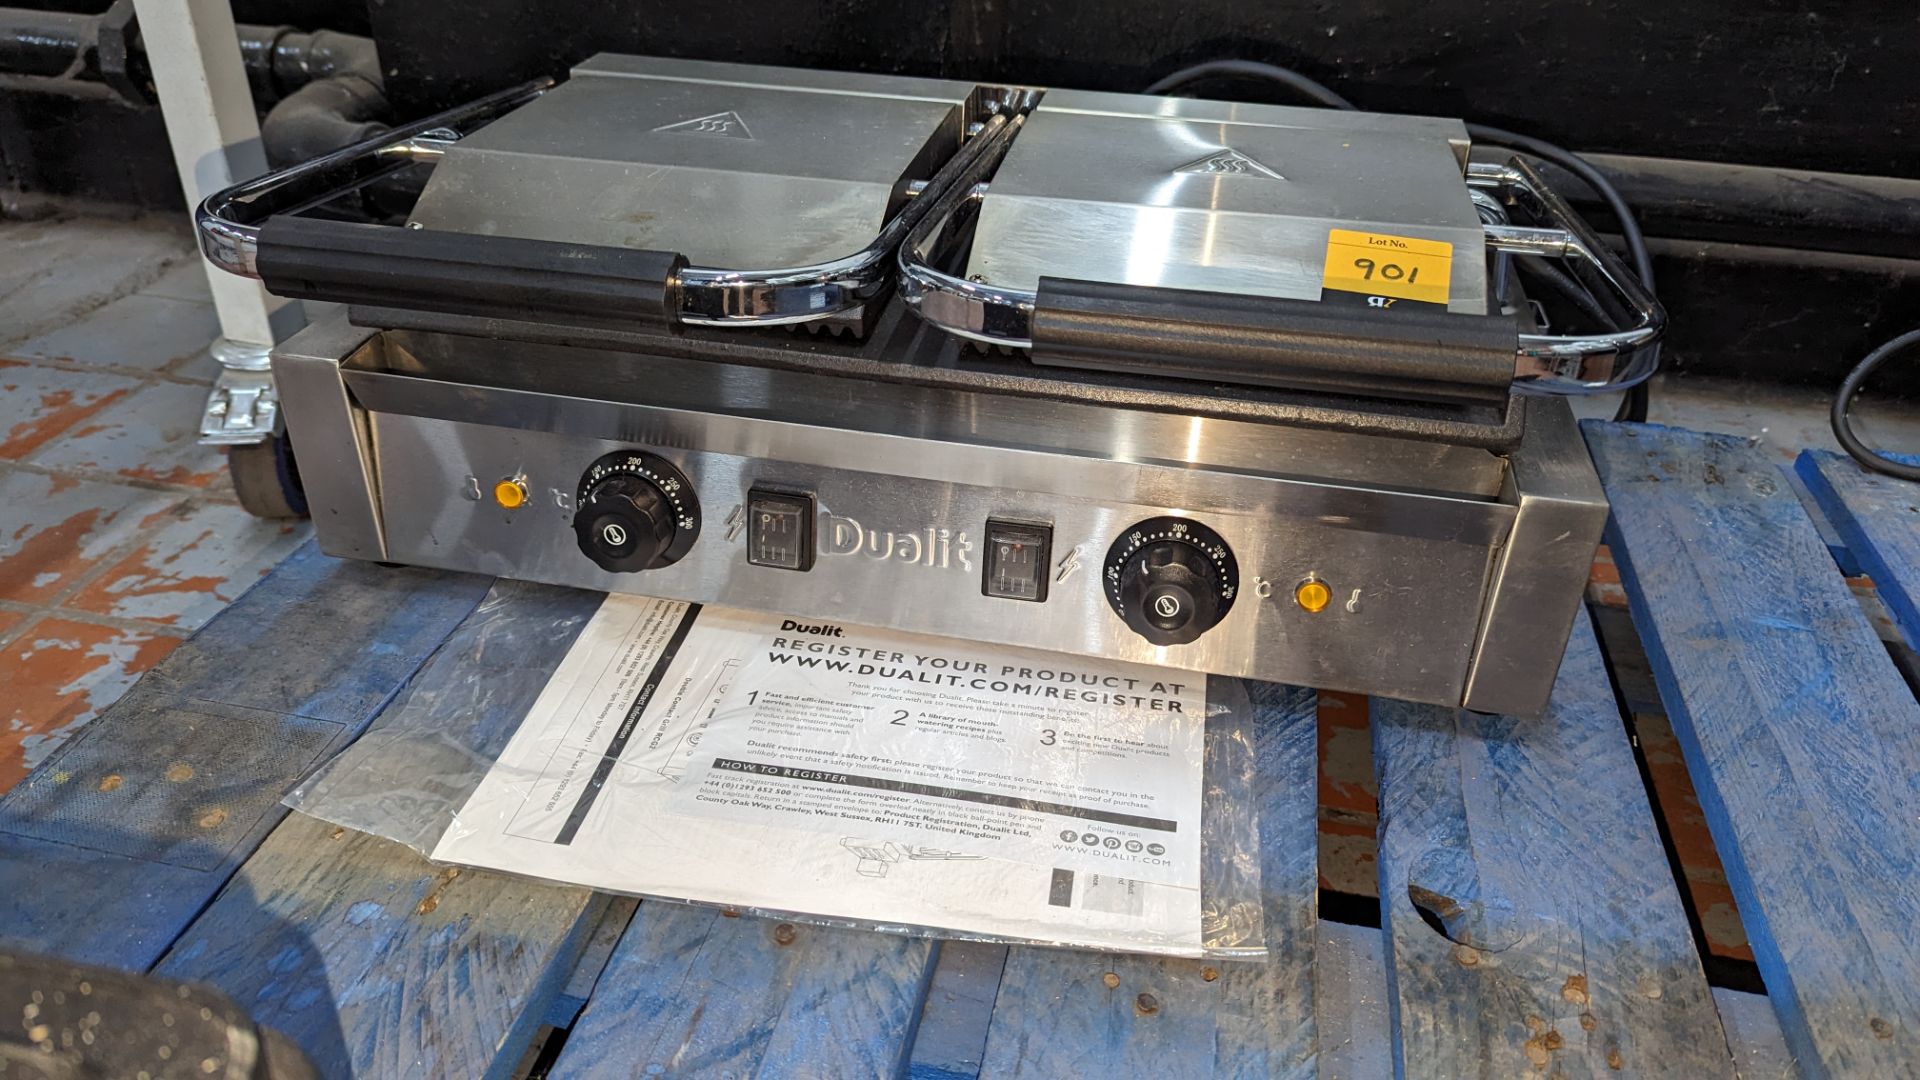 Dualit RCG2 double panini contact grill, including manual - Image 2 of 8